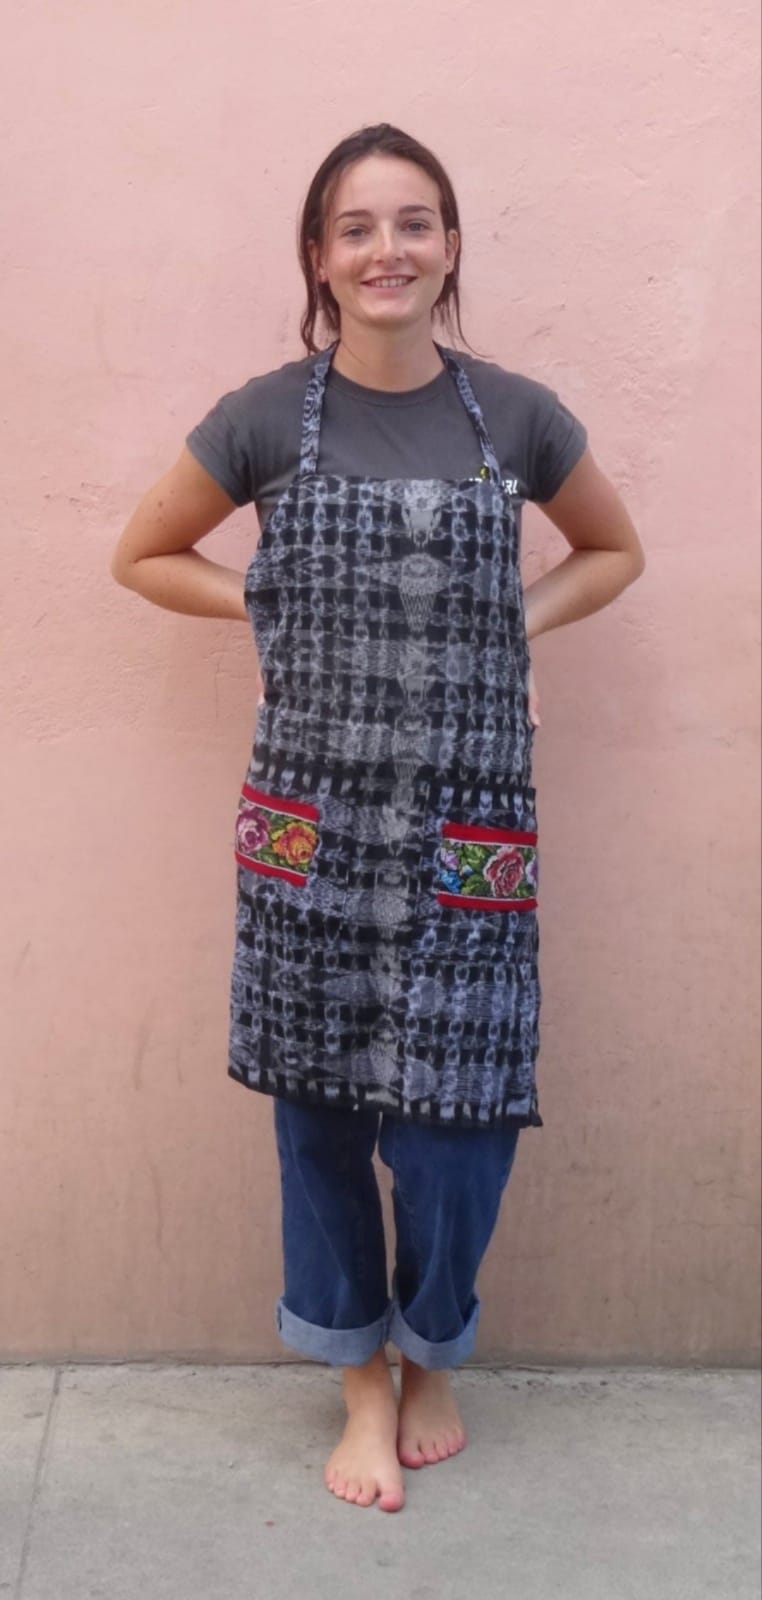 Upcycled Traditional Apron